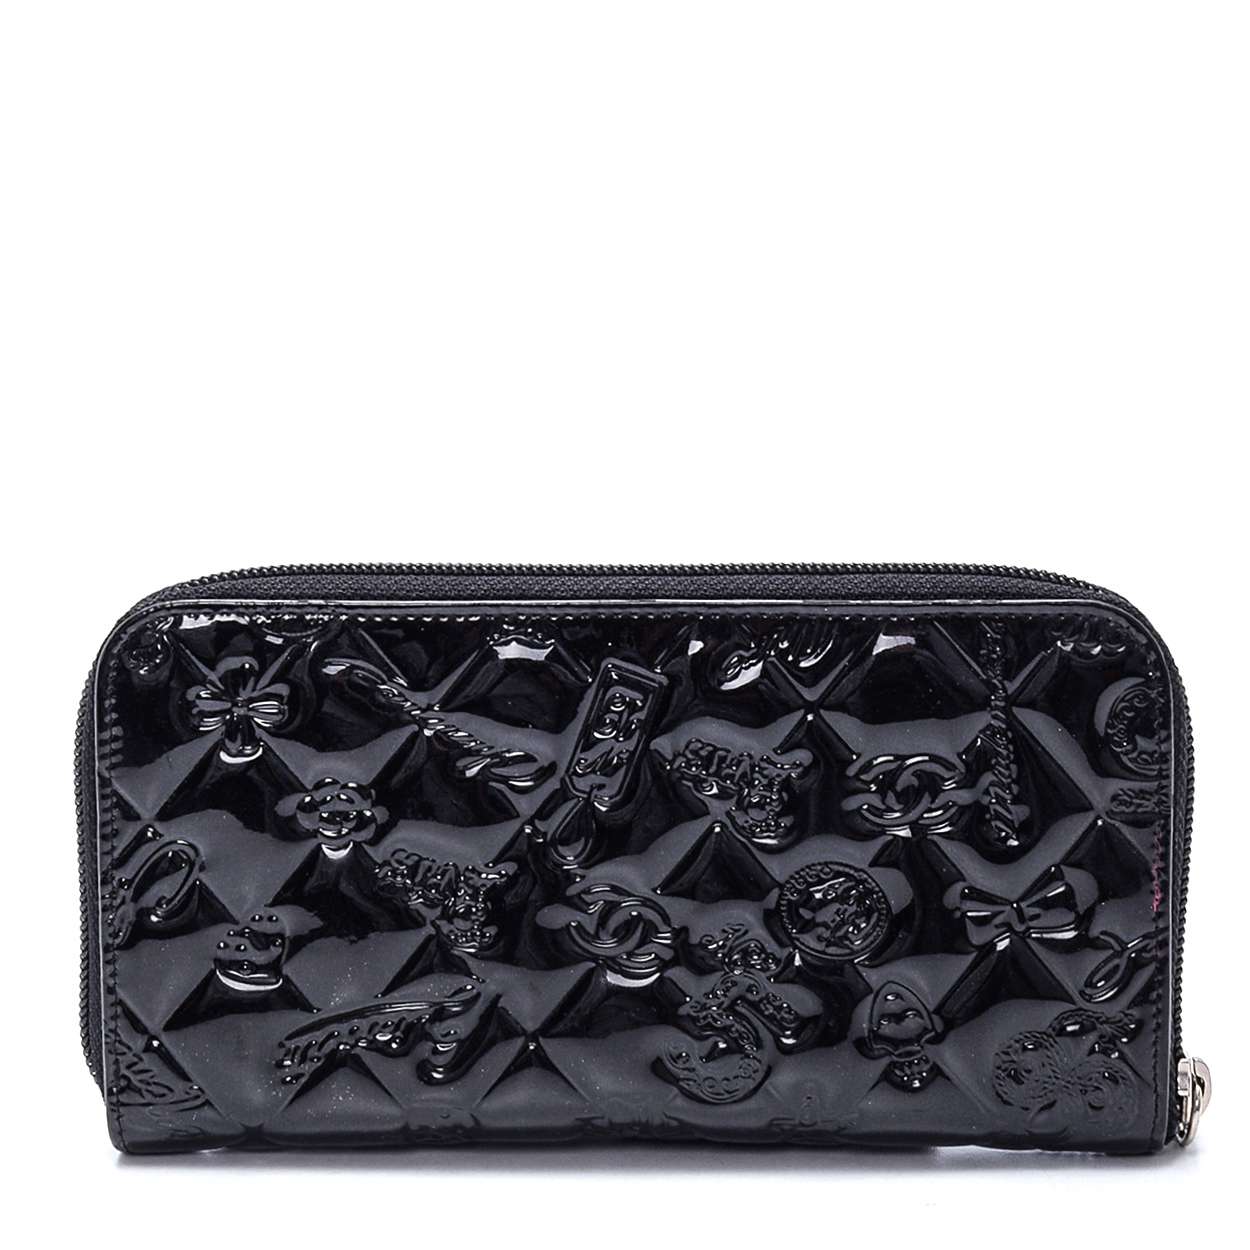 Chanel - Black Patent Leather Icon Symbols Quilted Wallet